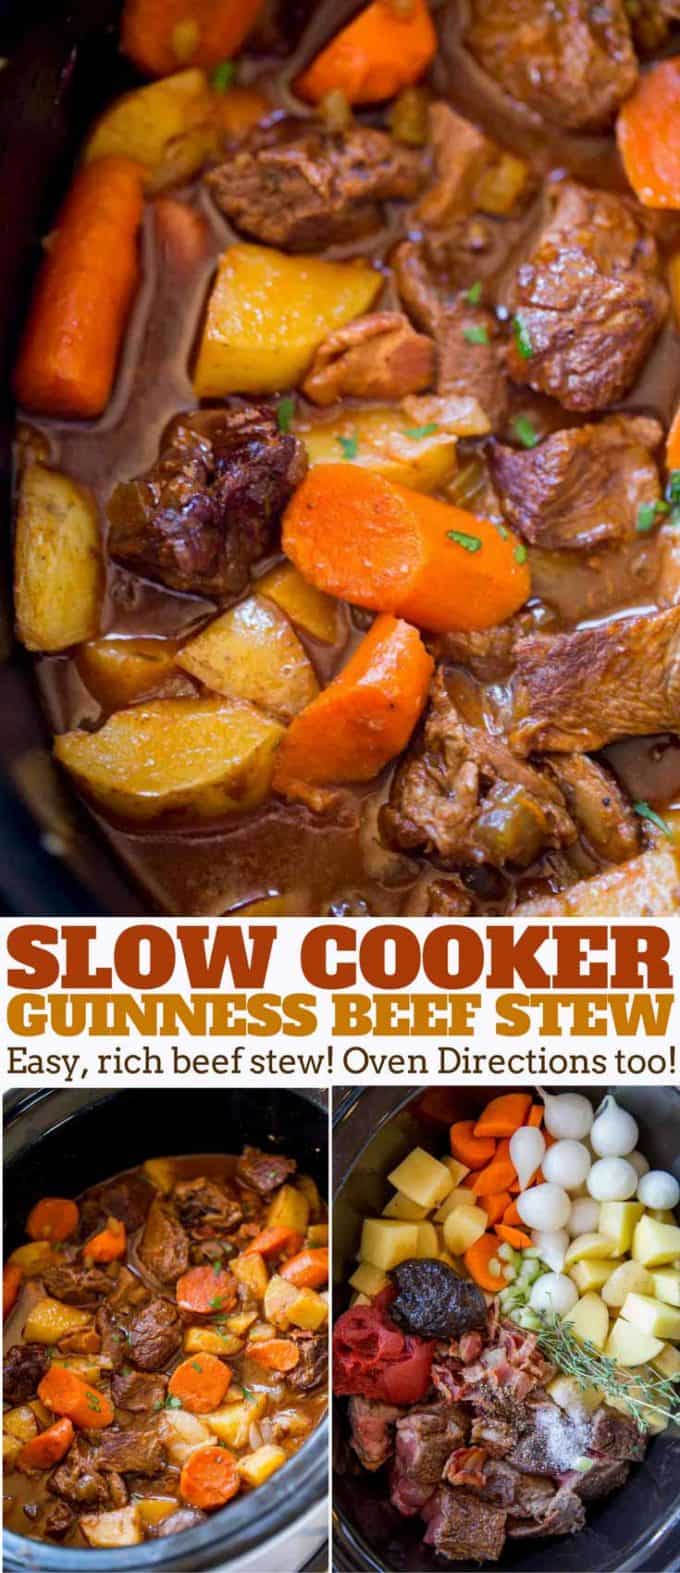 Slow Cooker Guinness Beef Stew with creamy Yukon potatoes, bacon, carrots and a rich tomato beef gravy, this is the perfect winter stew!